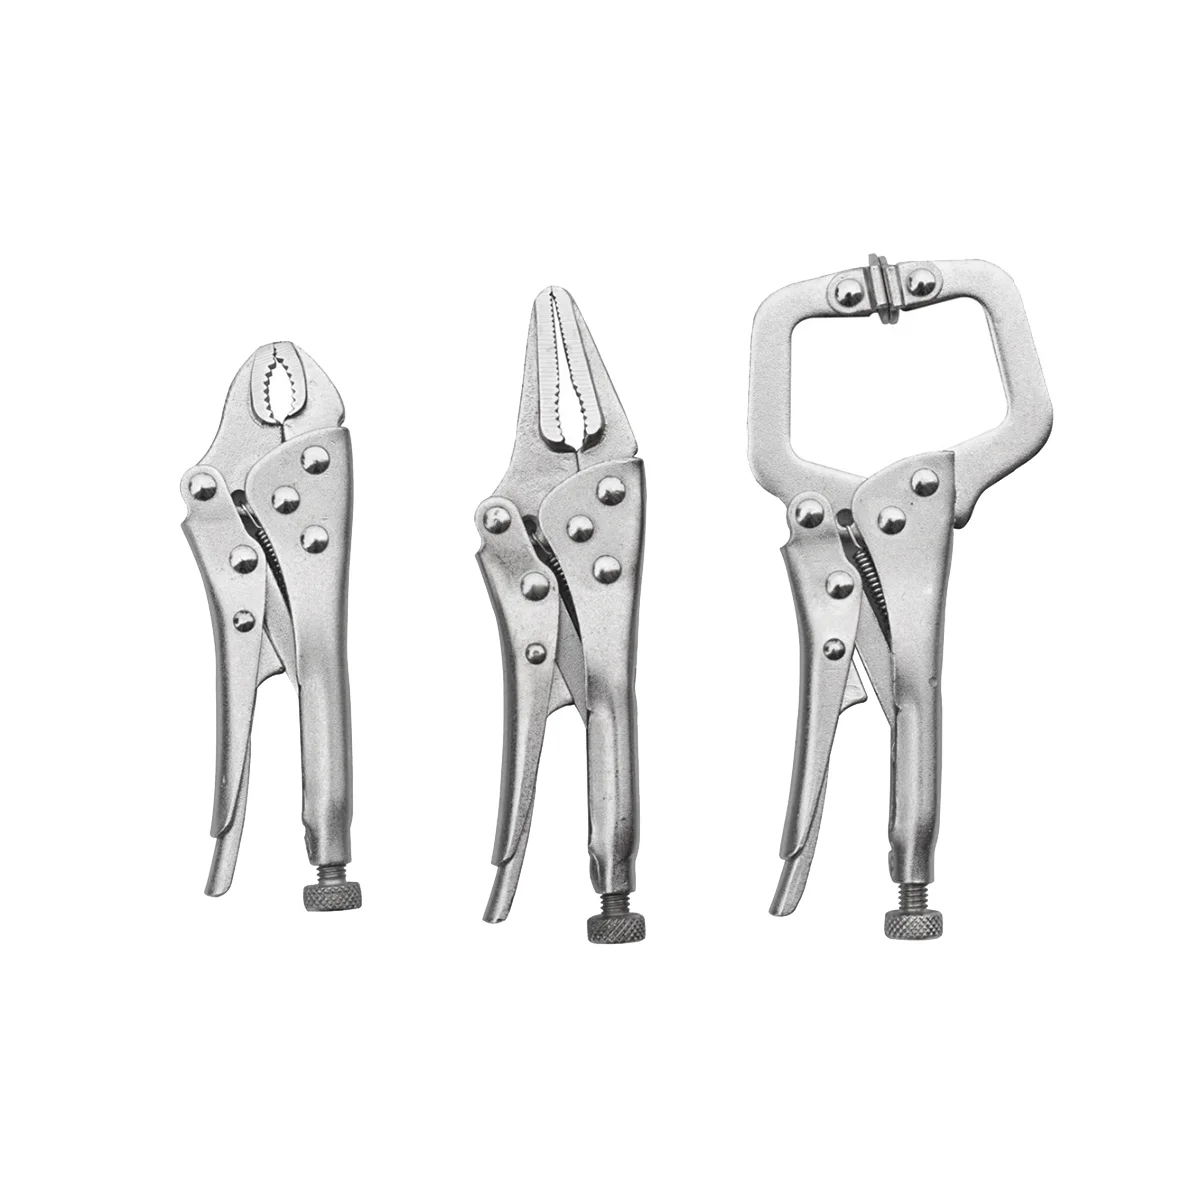 

3Pcs Mini Locking Pliers Set 4in Curved Jaw and 5in Long Nose and 5 in Grip Tool Assorted Locking Welding Grip Tool